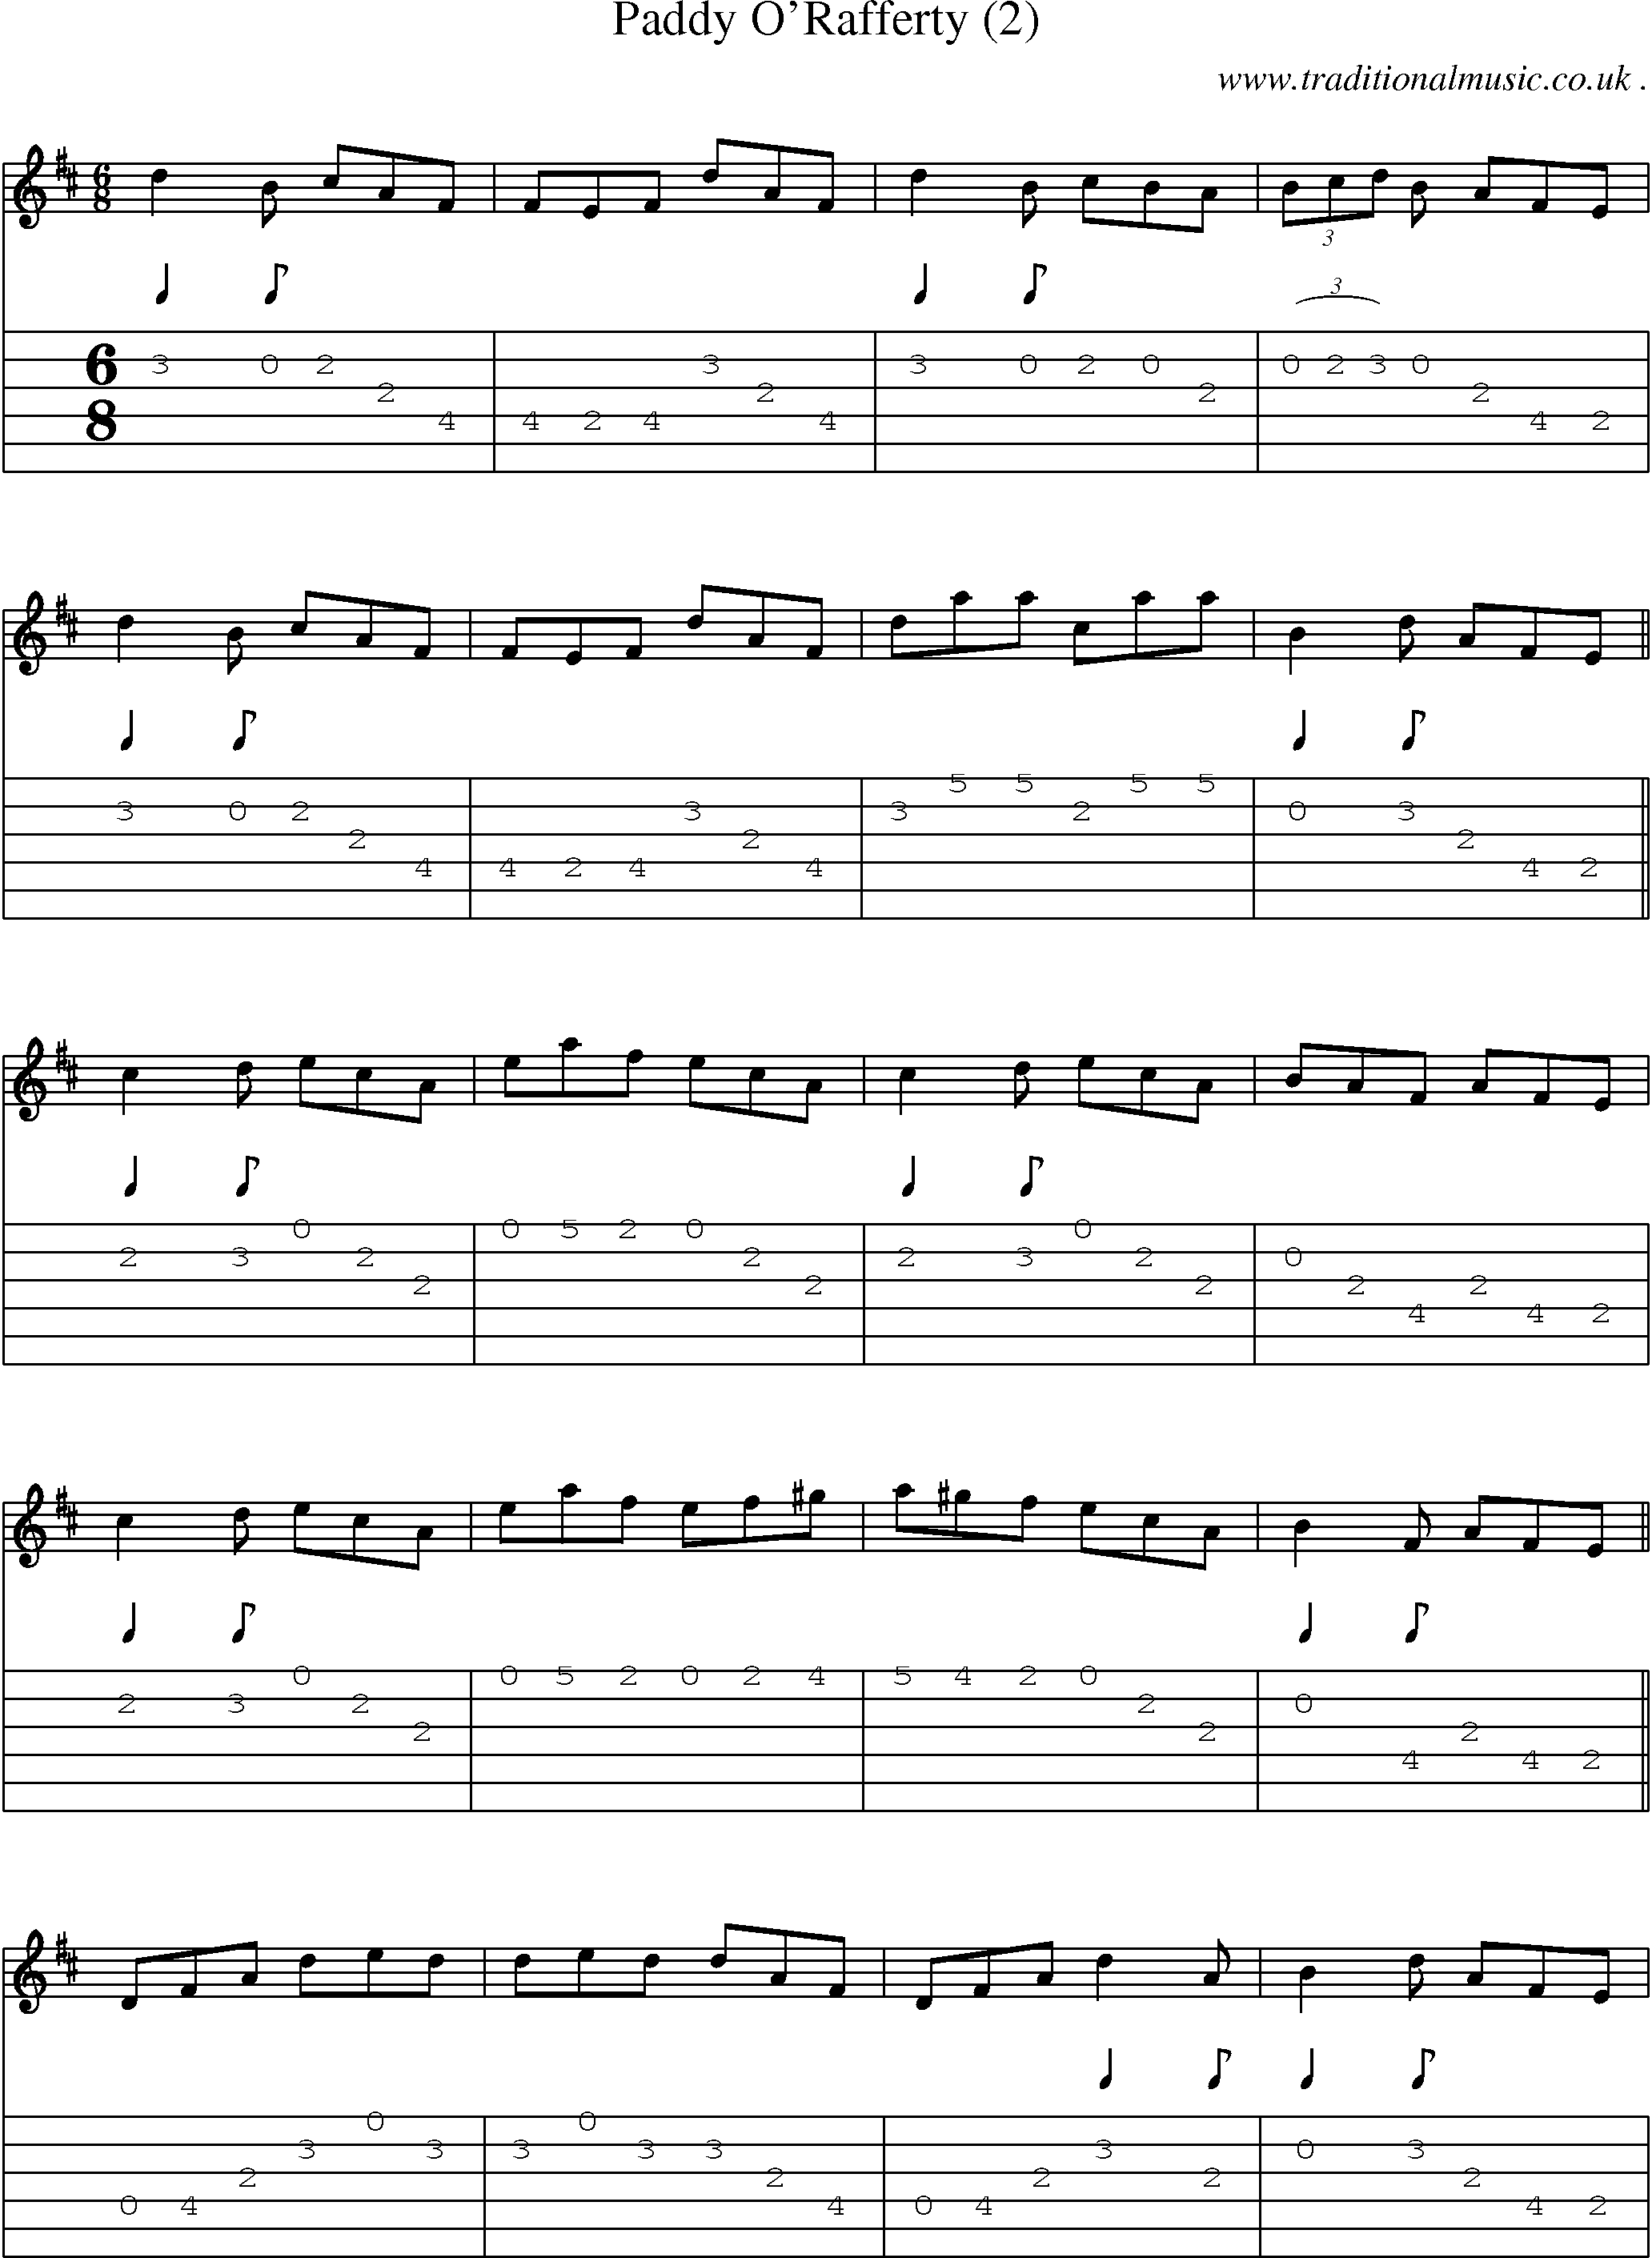 Sheet-Music and Guitar Tabs for Paddy Orafferty (2)